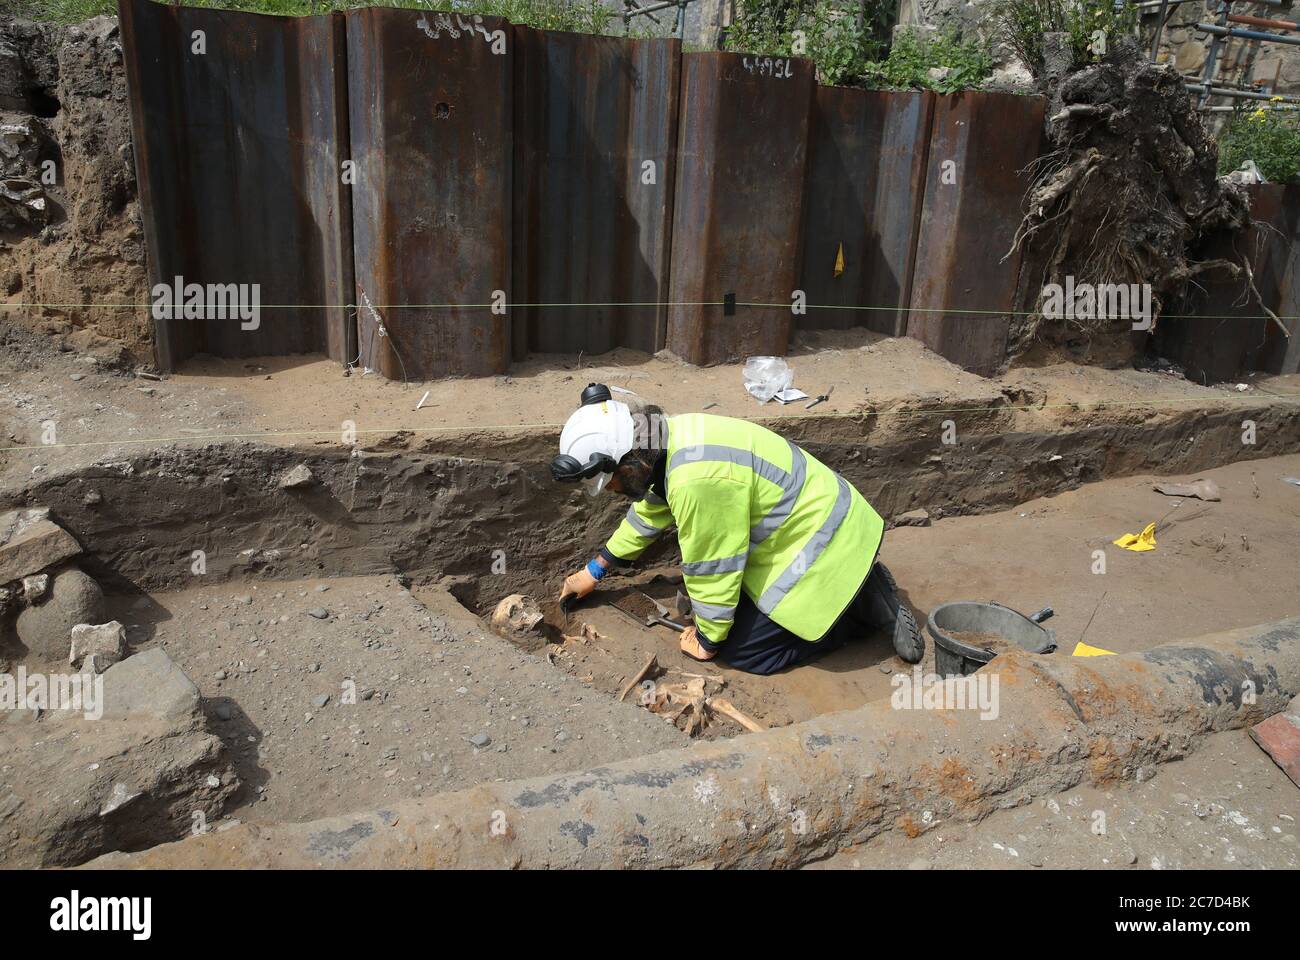 An Archaeologist from the Trams to Newhaven project excavating human remains, which could date back as far as 1300, from the graves of South Leith Parish Church whose medieval graveyard extends beneath the road surface of Constitution Street, Leith. Stock Photo